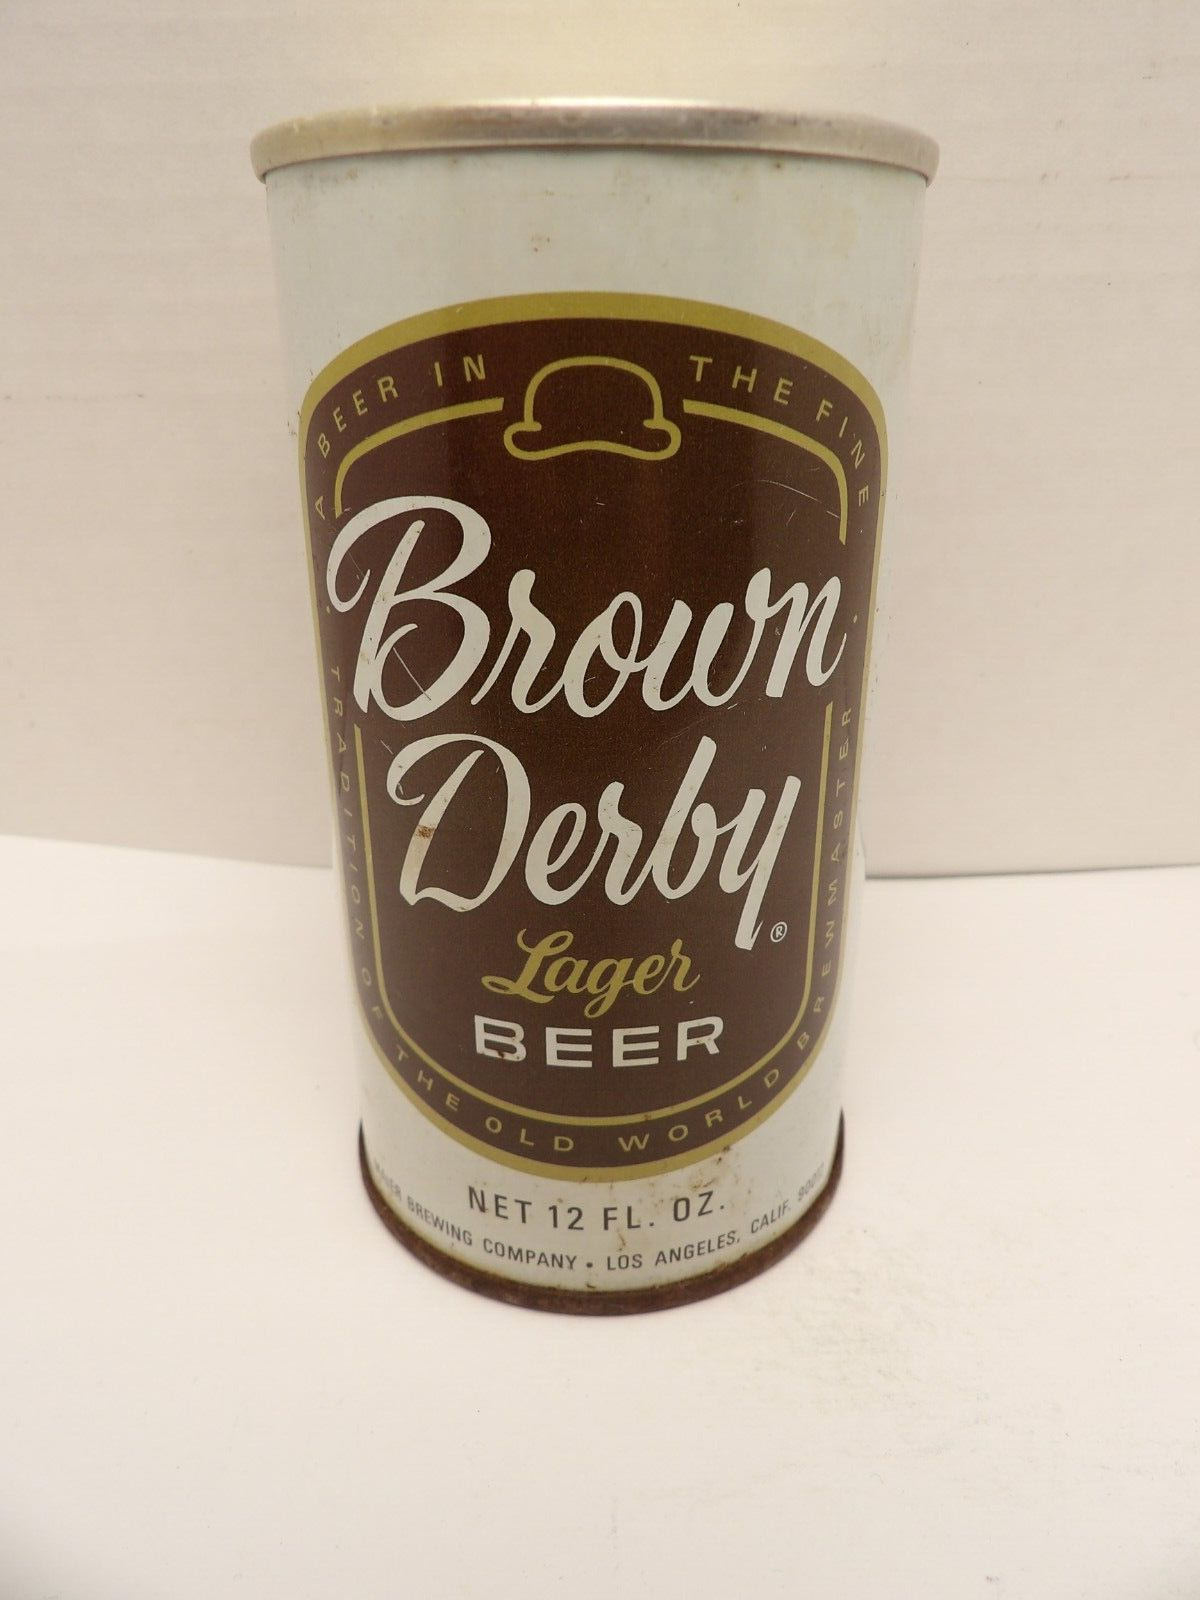 BROWN DERBY STRAIGHT STEEL PULL TAB BEER CAN #46-16 MAIER BREWING CALIFORNIA